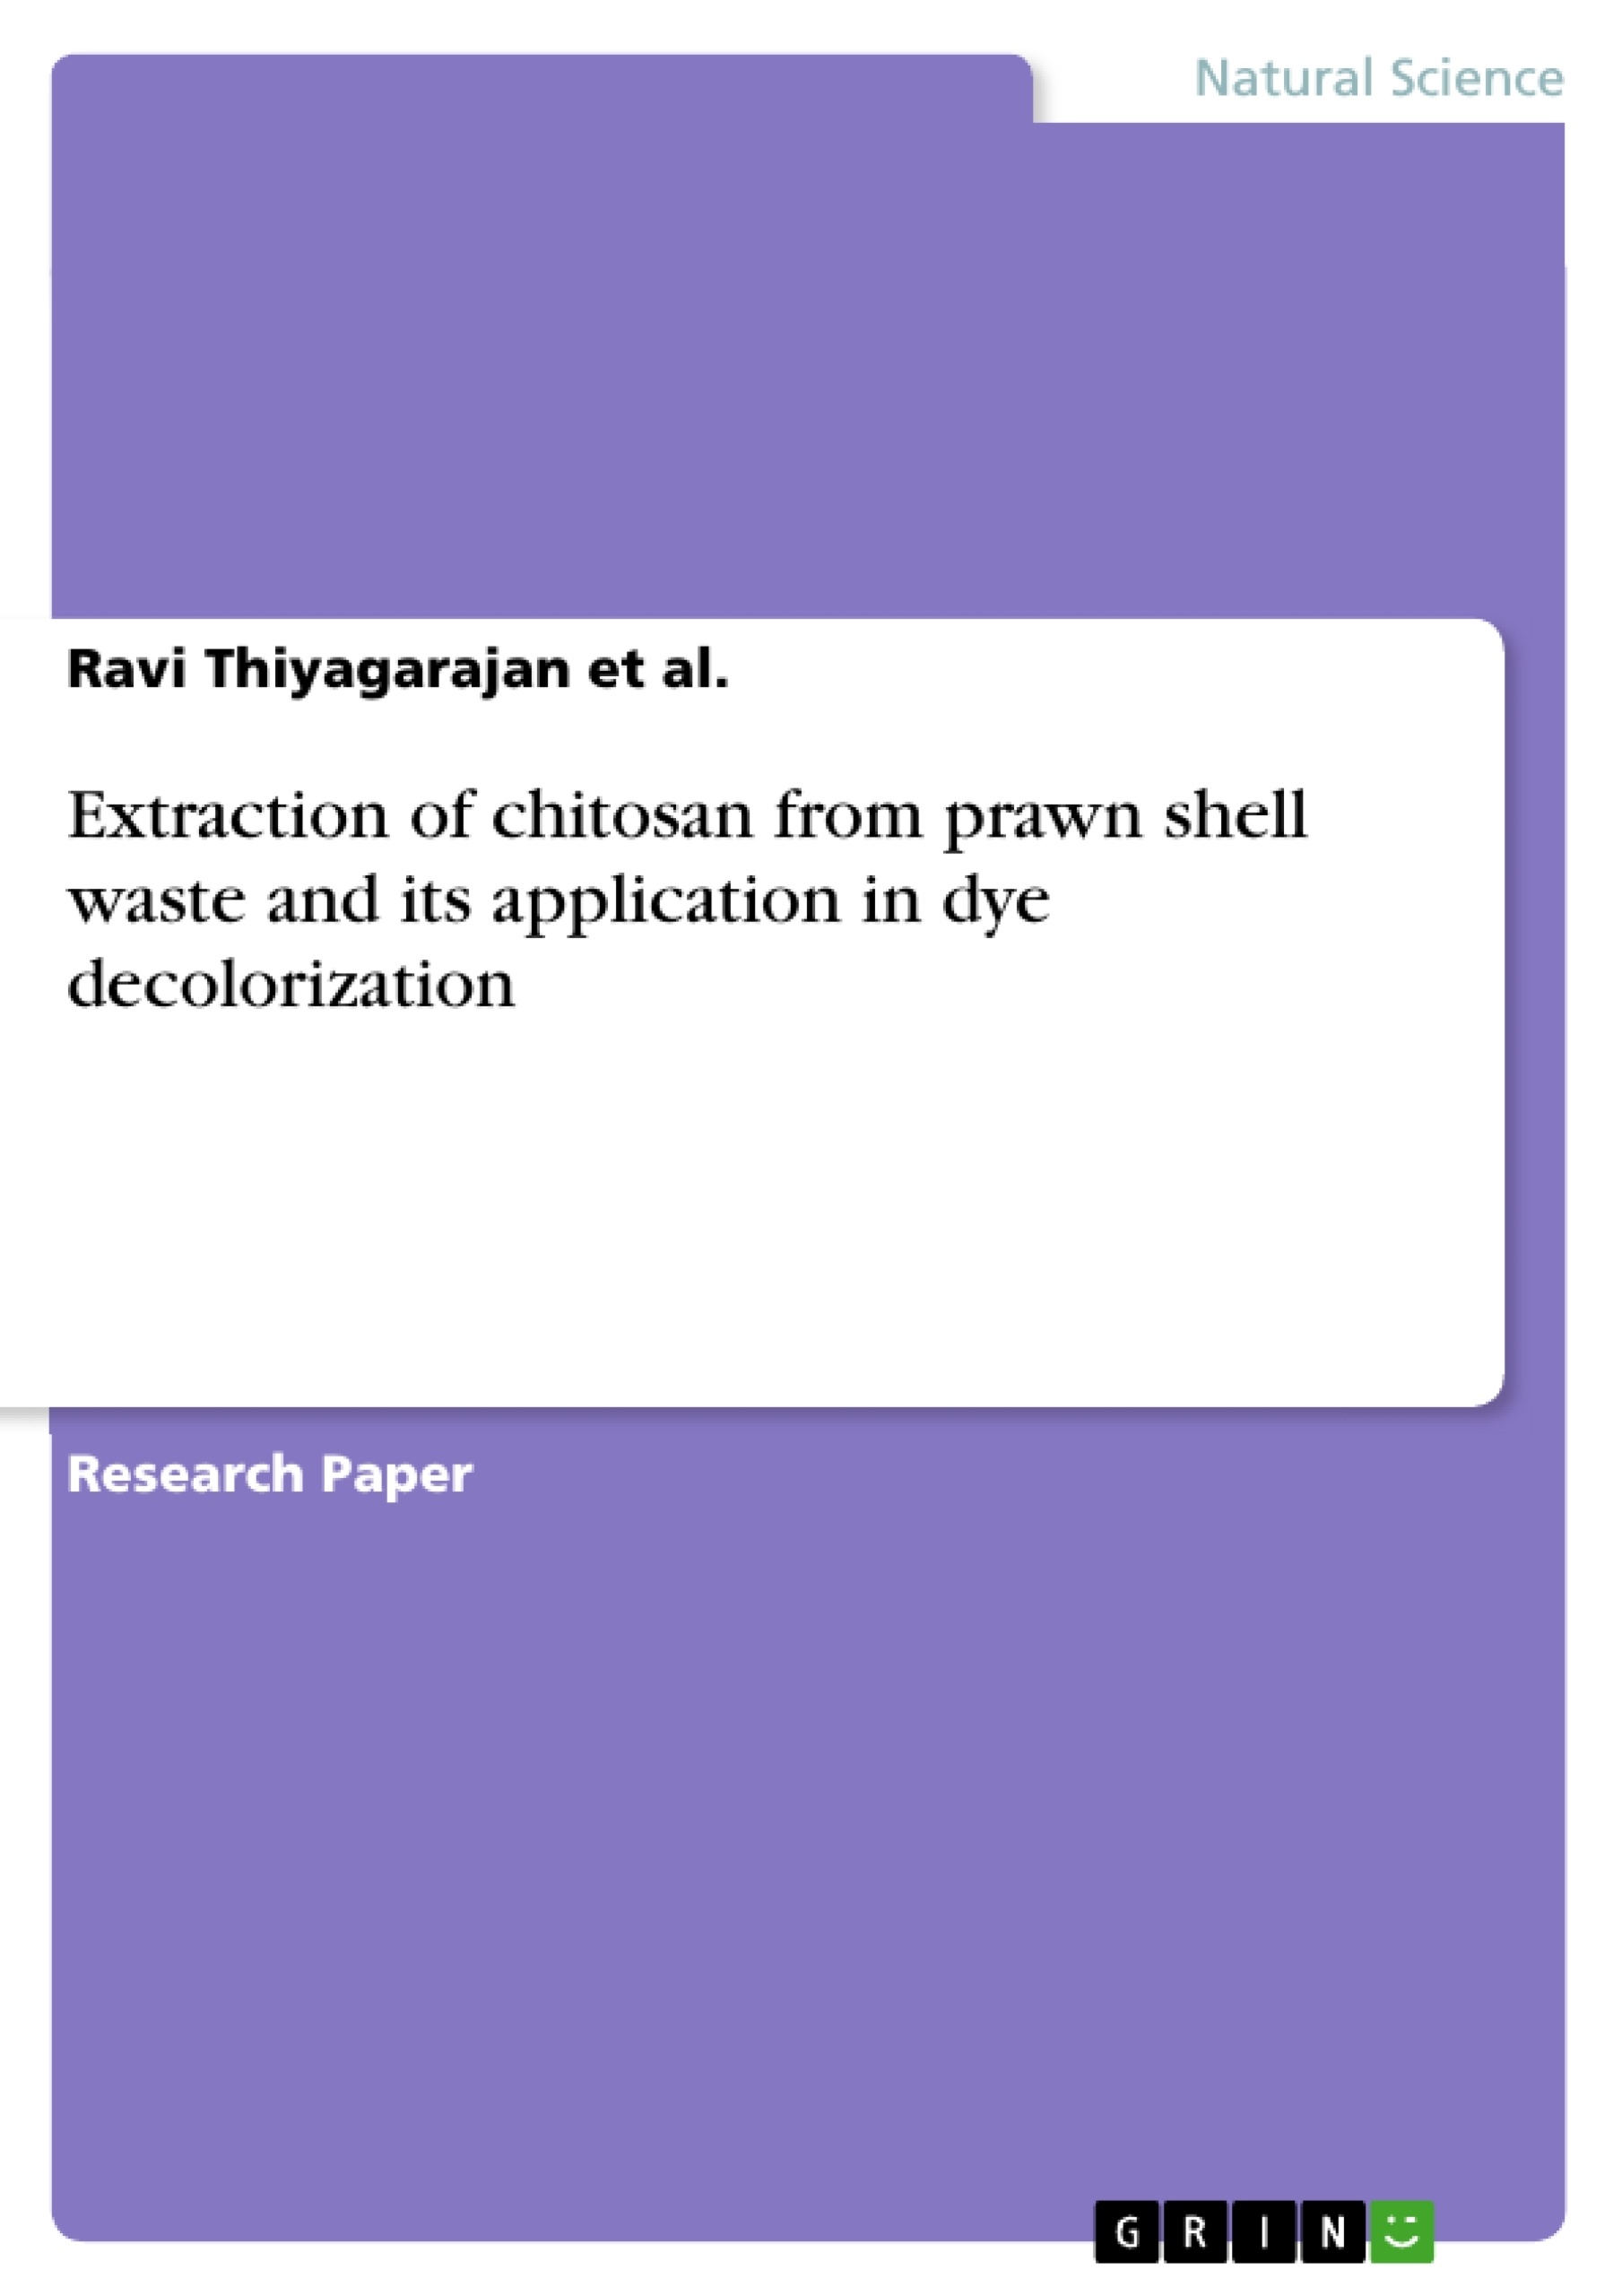 Titel: Extraction of chitosan from prawn shell waste and its application in dye decolorization